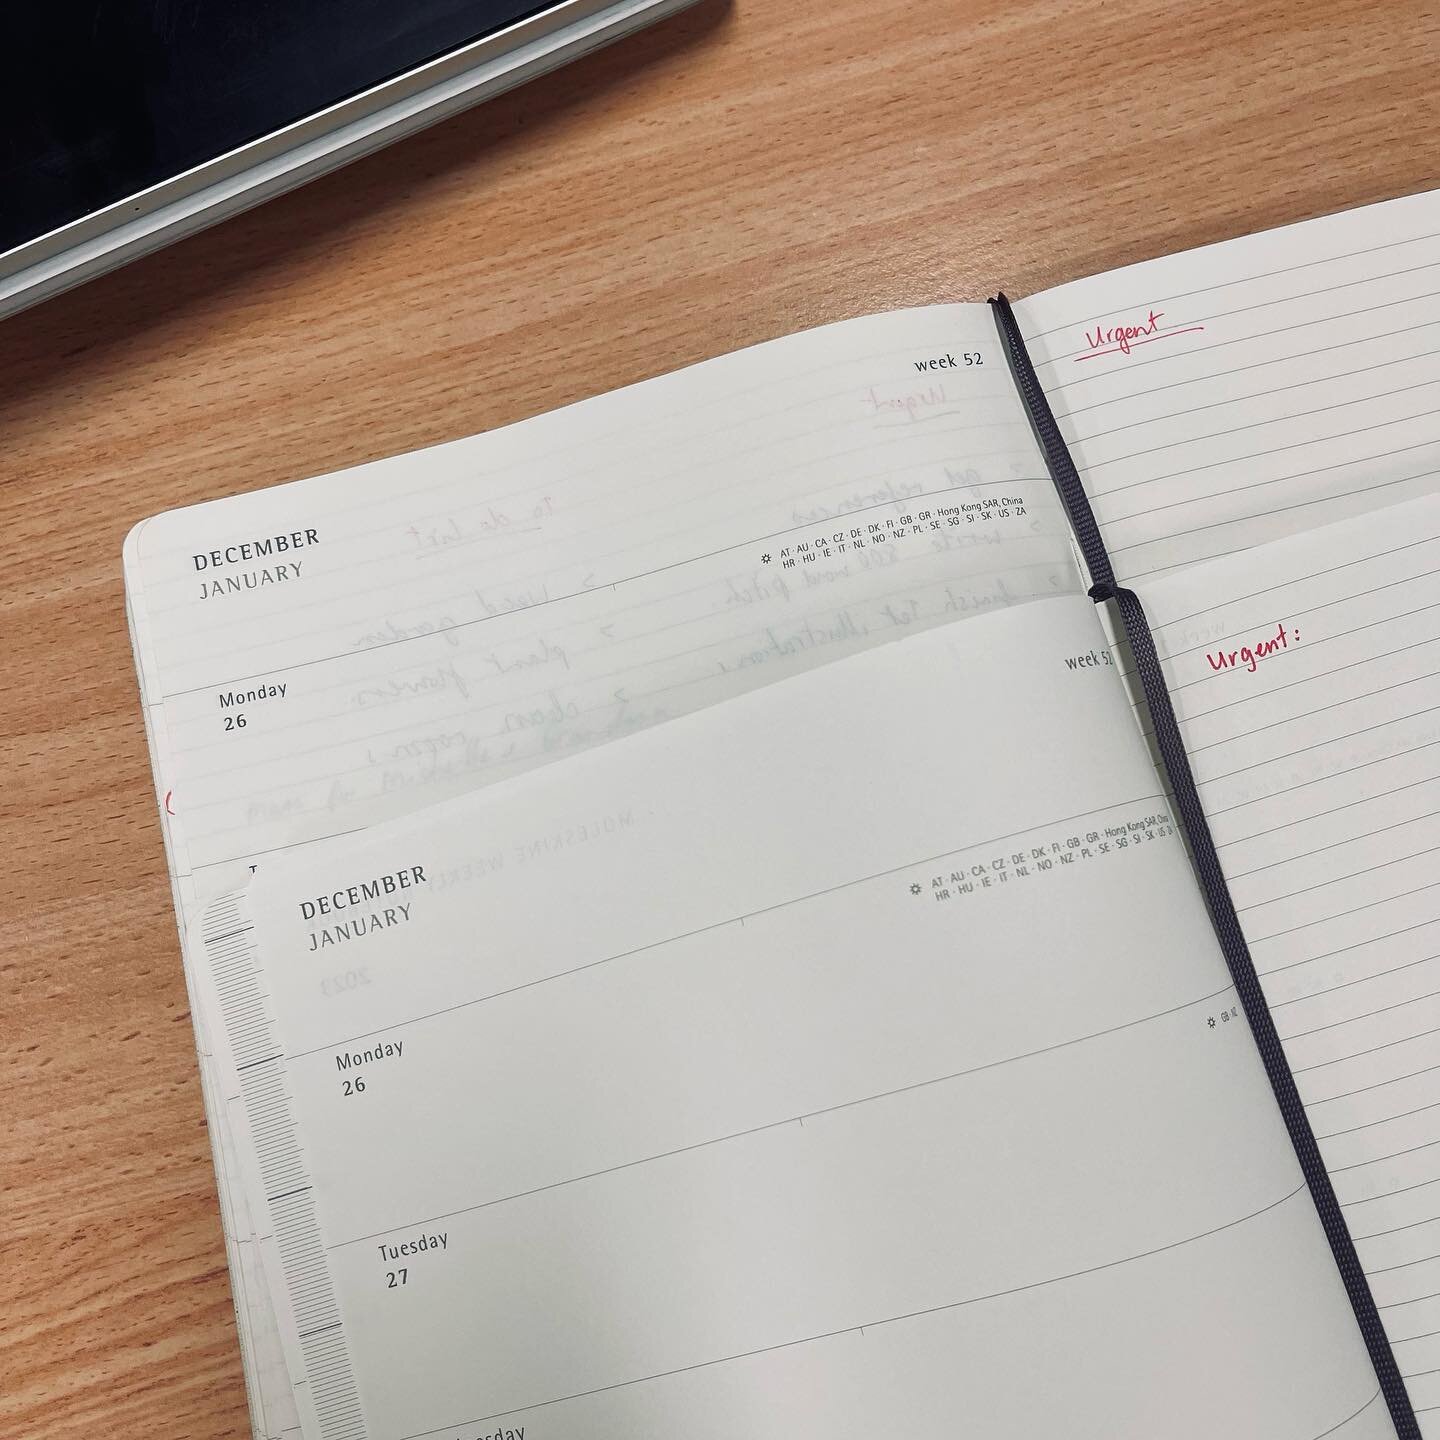 The year went by real quick. We&rsquo;re on the last week of my 2022 diary but also on the first week of my 2023 diary. 

Time to crack into it and finish up all my plans in preparation for another year. 

Have a great limbo week 🥳